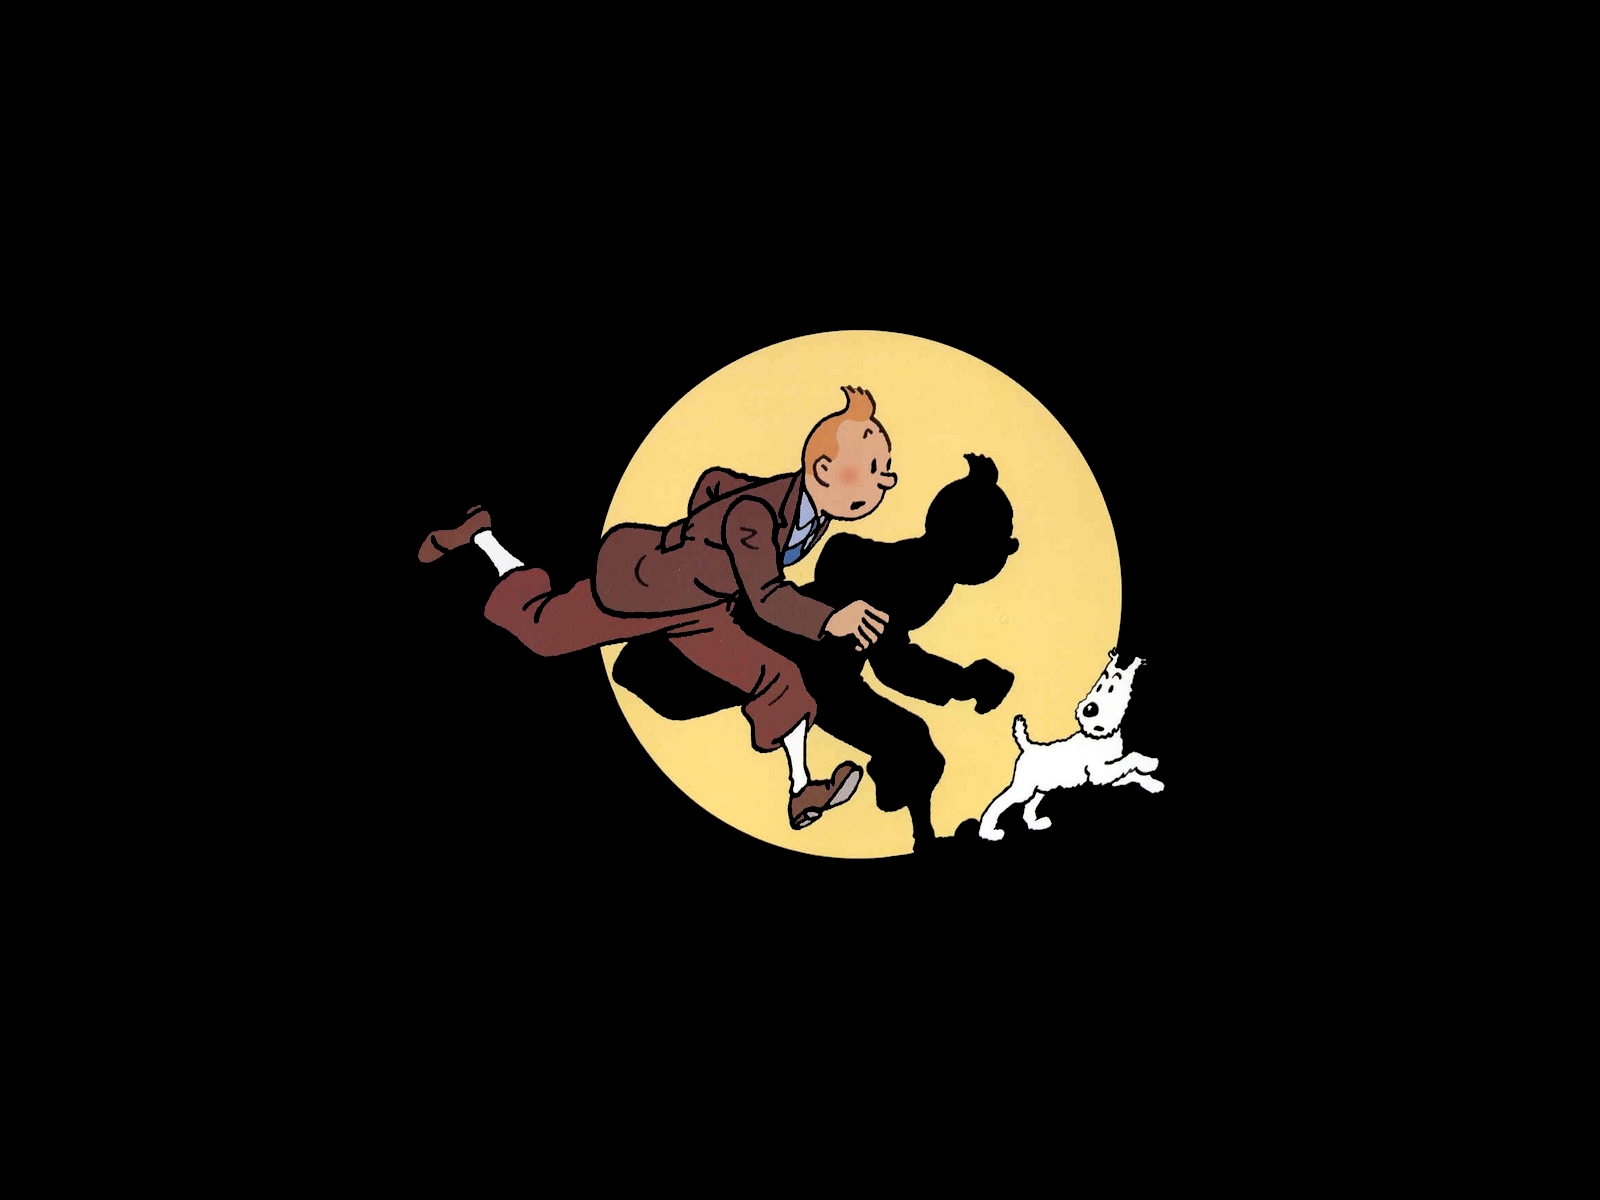 Tintin Image HD Wallpaper And Background Photos